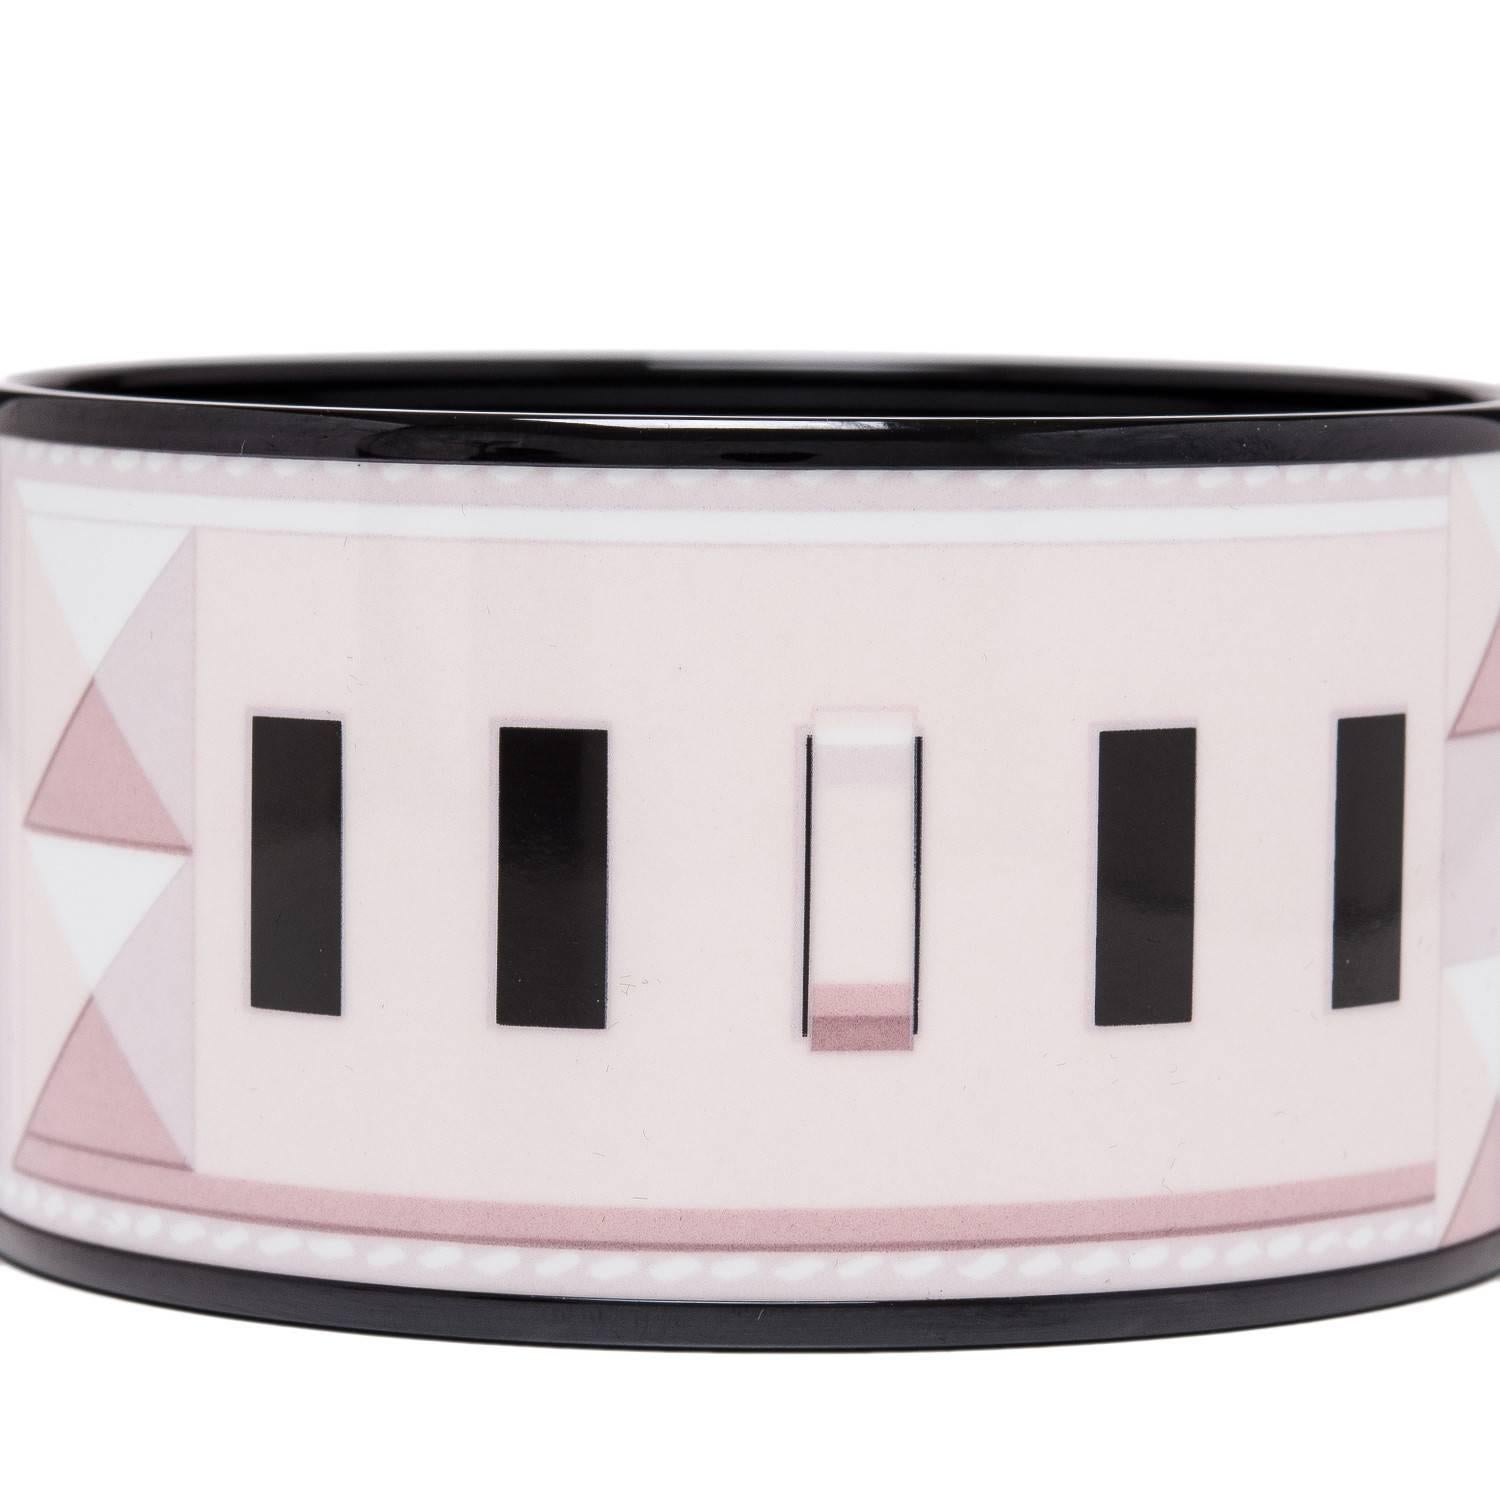 Hermes "Collier de Chiens" extra wide printed enamel bracelet size PM (65).

This bracelet depicts the Hermes Collier de Chien leather cuff on a pink colored background with black pvd hardware.

Origin: France

Condition: Pristine,